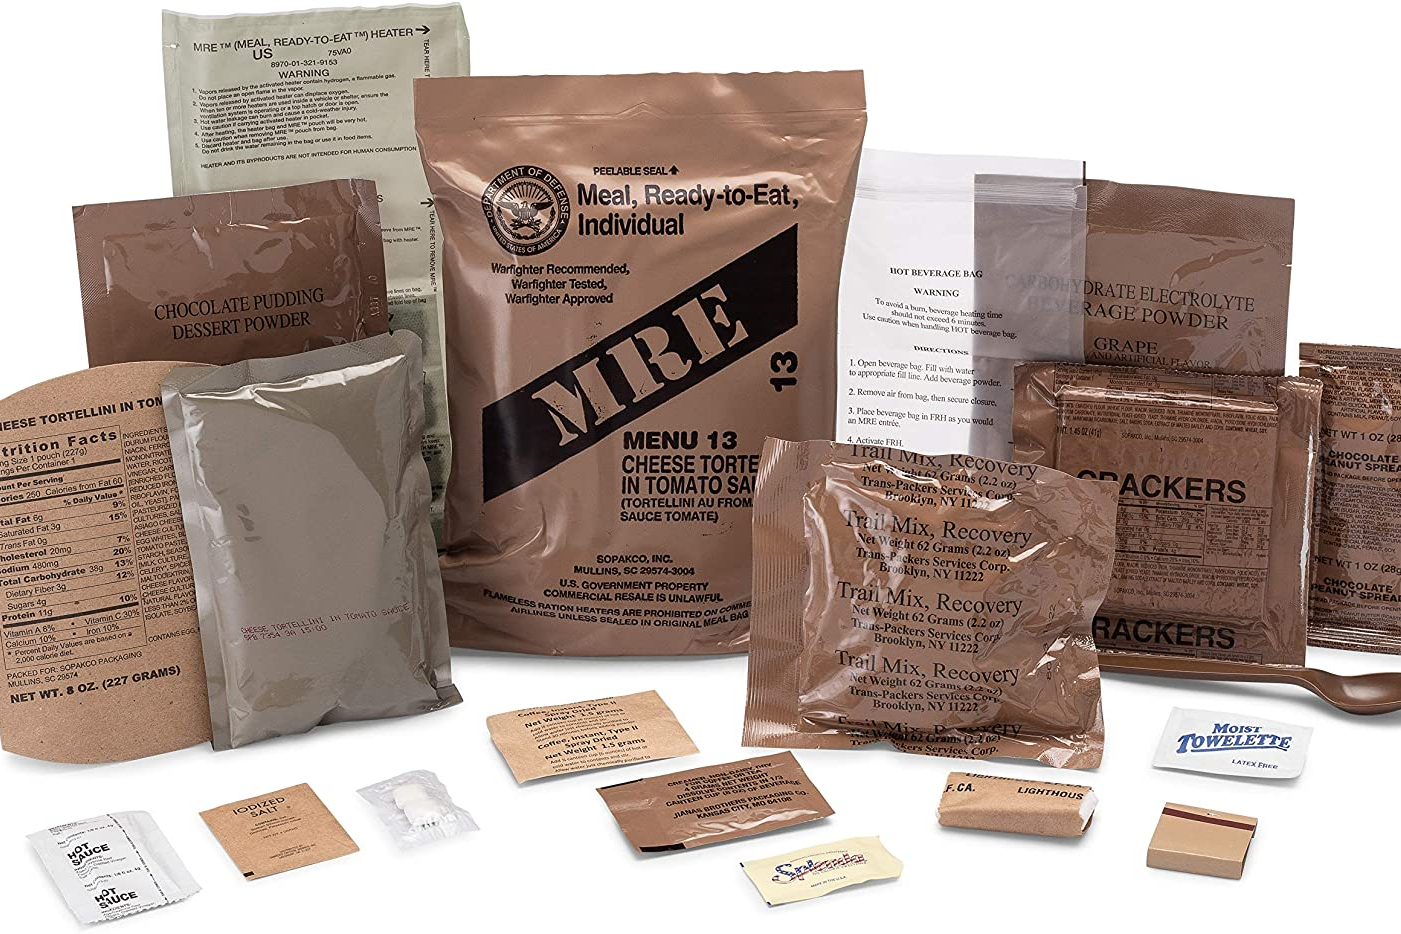 Stock up for emergencies with these great survival food packs - The Manual